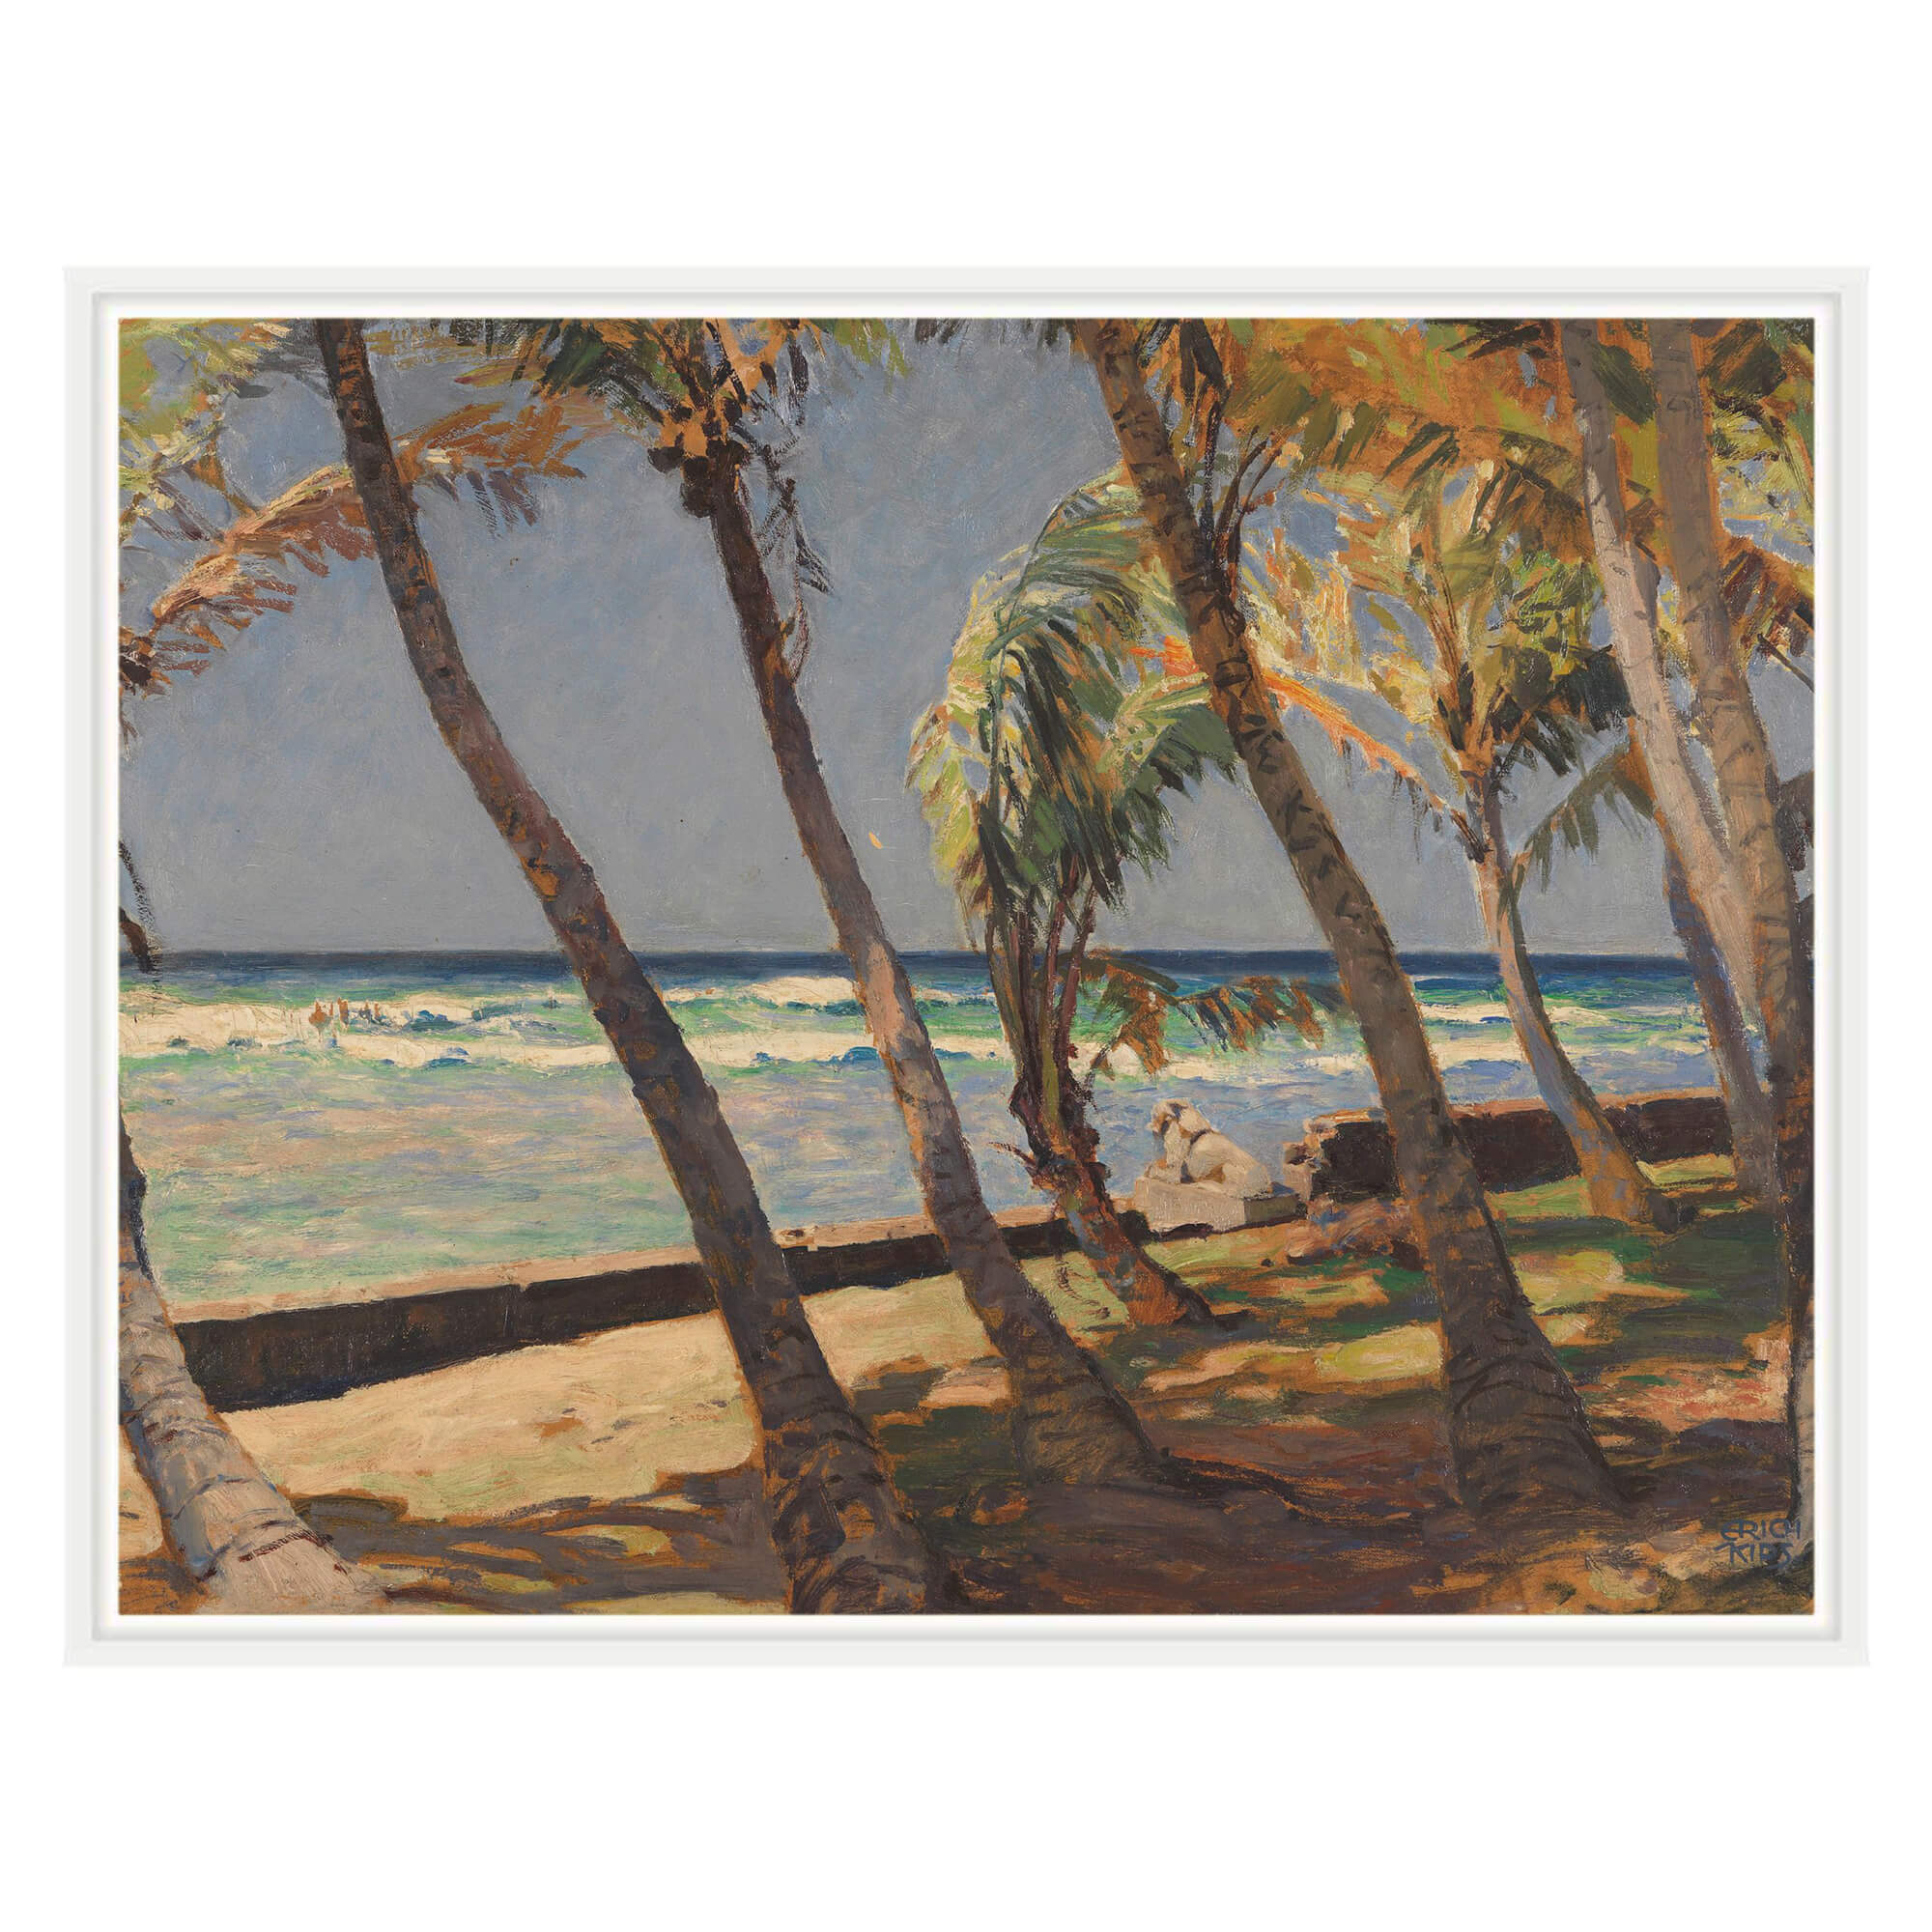 A vintage colored beach scenery with a white dog